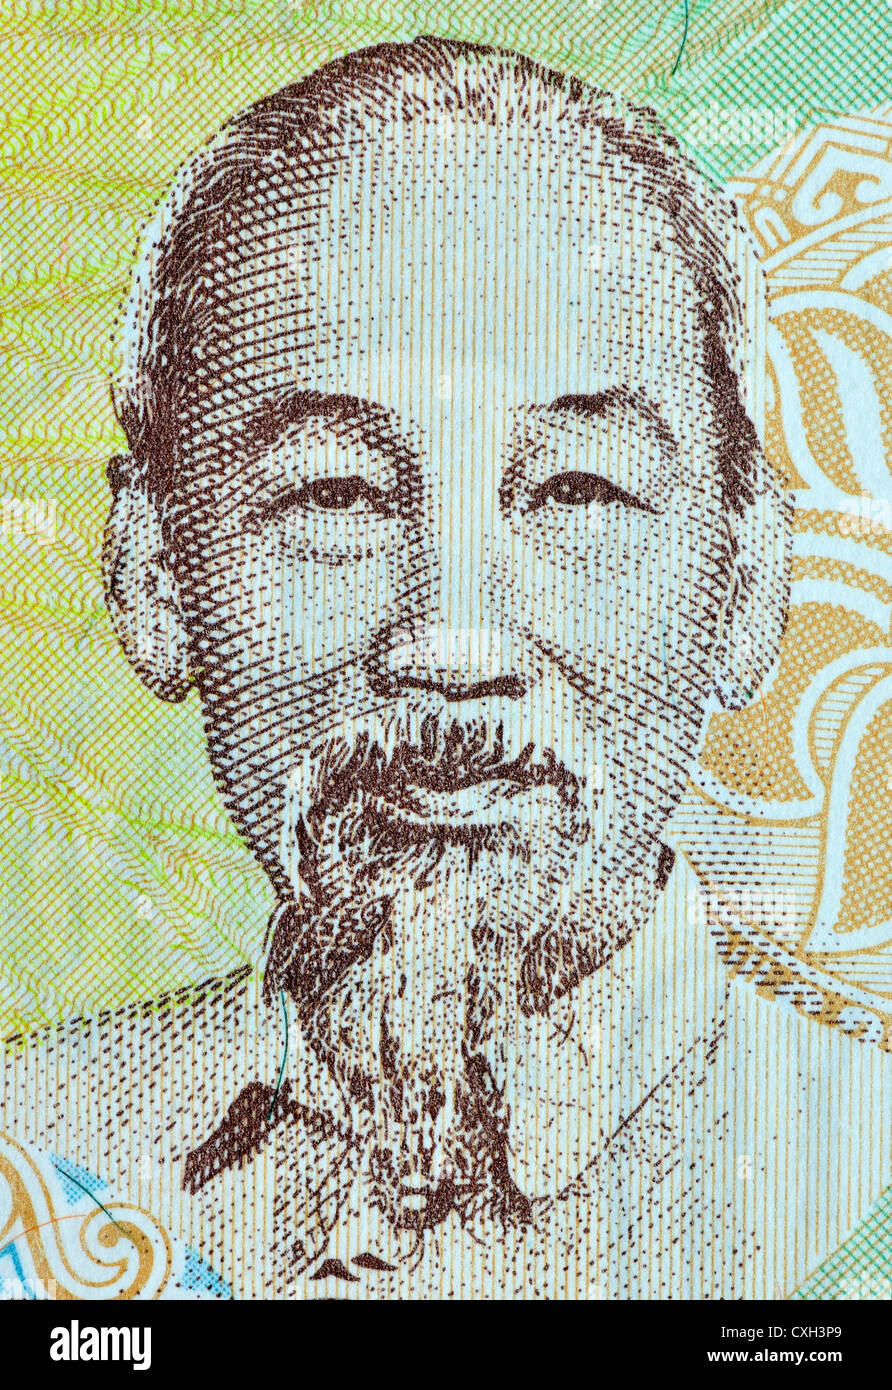 Vietnamese 1000 Dong banknote (1988) Portrait of Ho Chi Minh Stock Photo